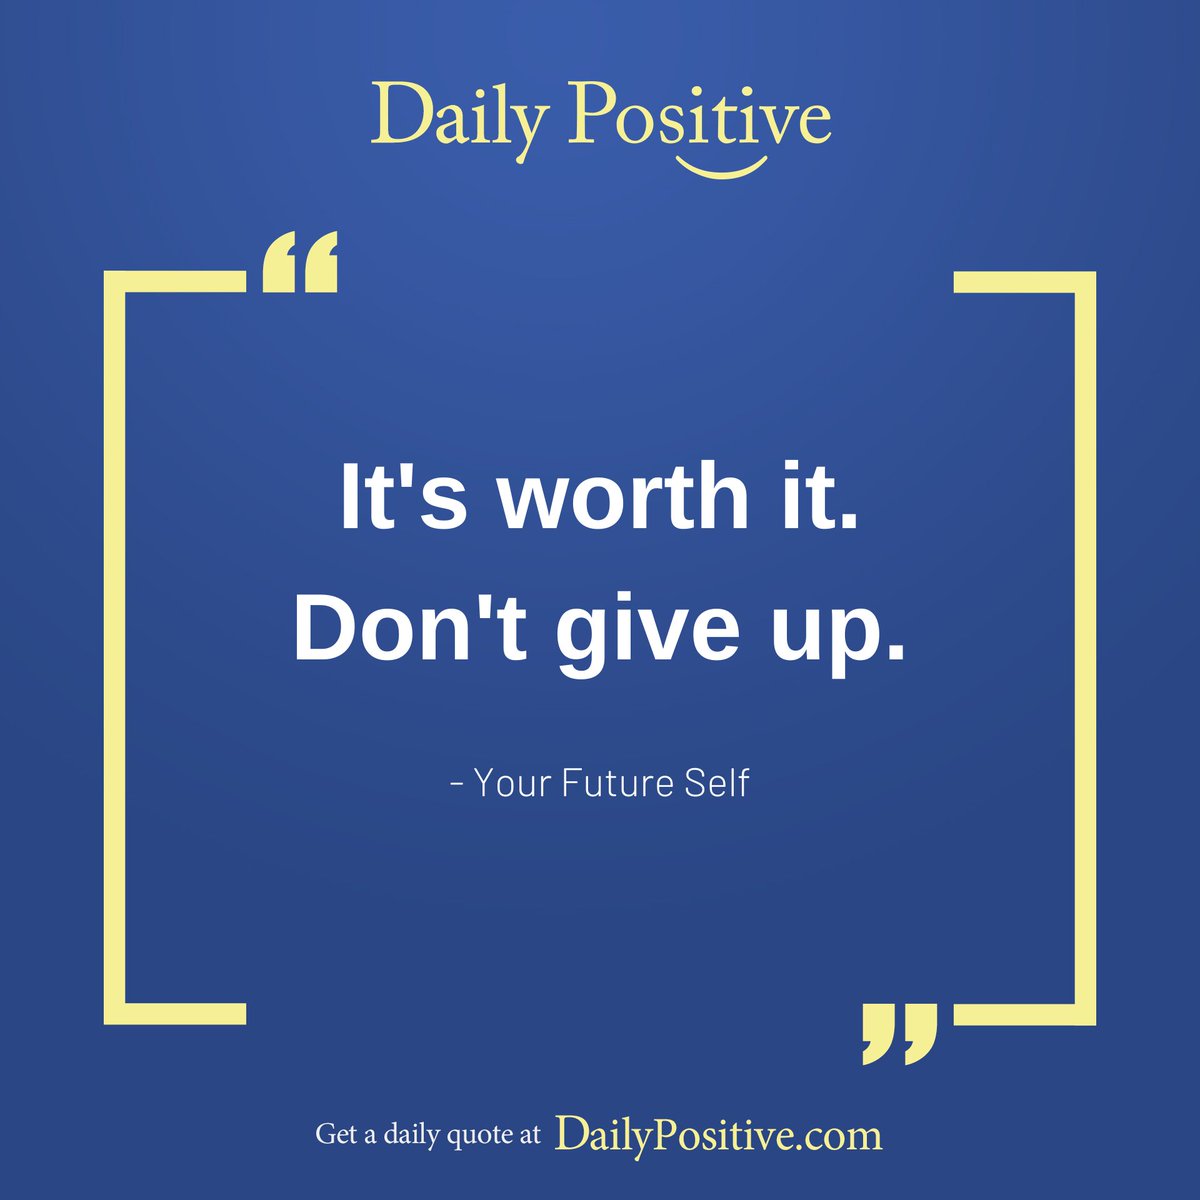 ✨ Your future self is rooting for you: It's worth it. Keep going! 💪

#TheMathewsAgency #SFGLife #QuilityInsurance #DailyPositive #Motivation #JonGordon #FutureSelf #StayMotivated